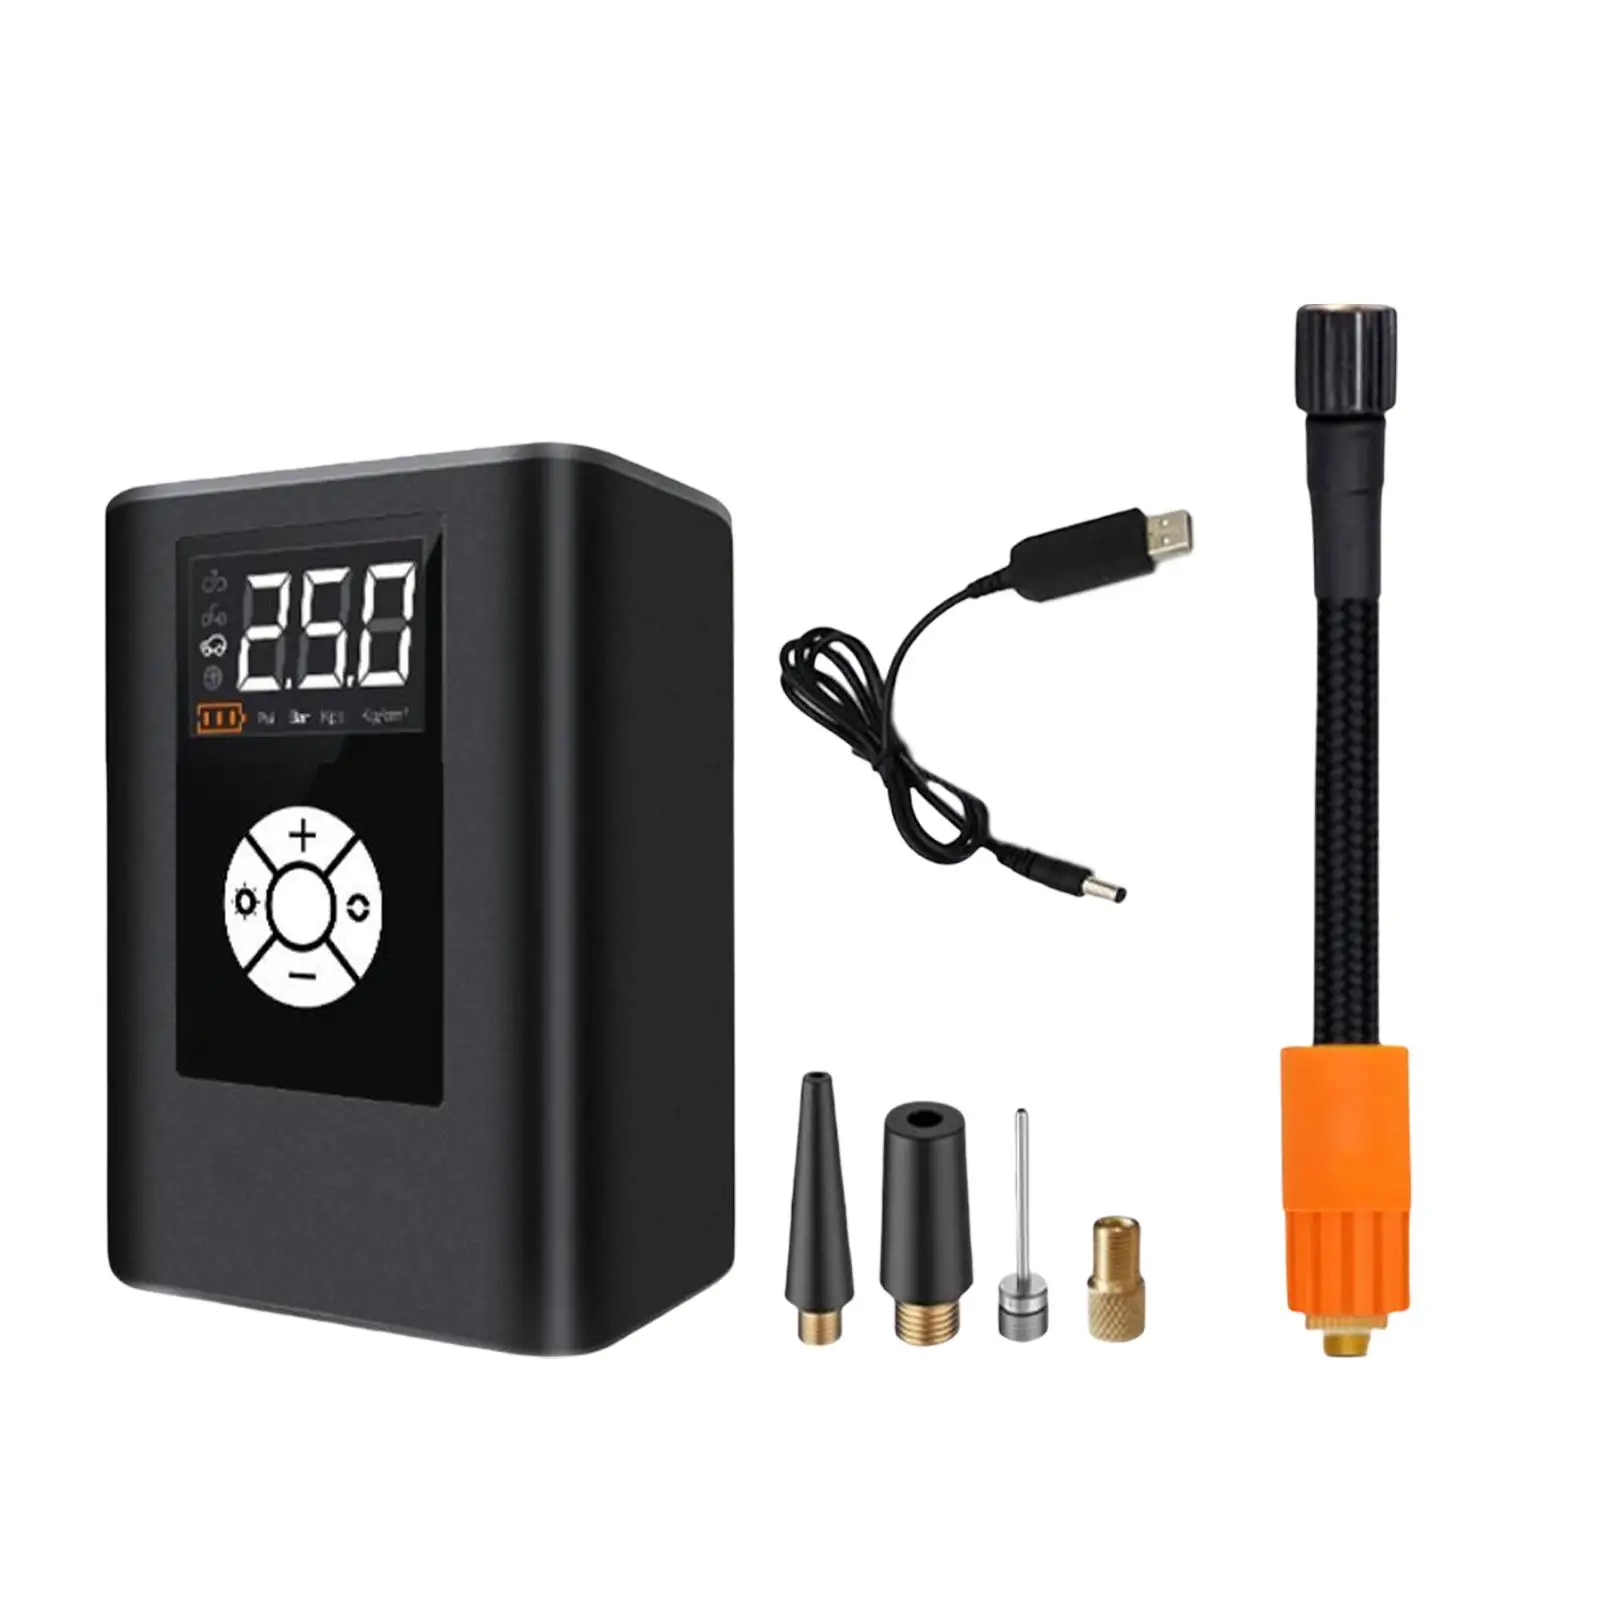 Portable car tire inflator with compact digital pressure gauge